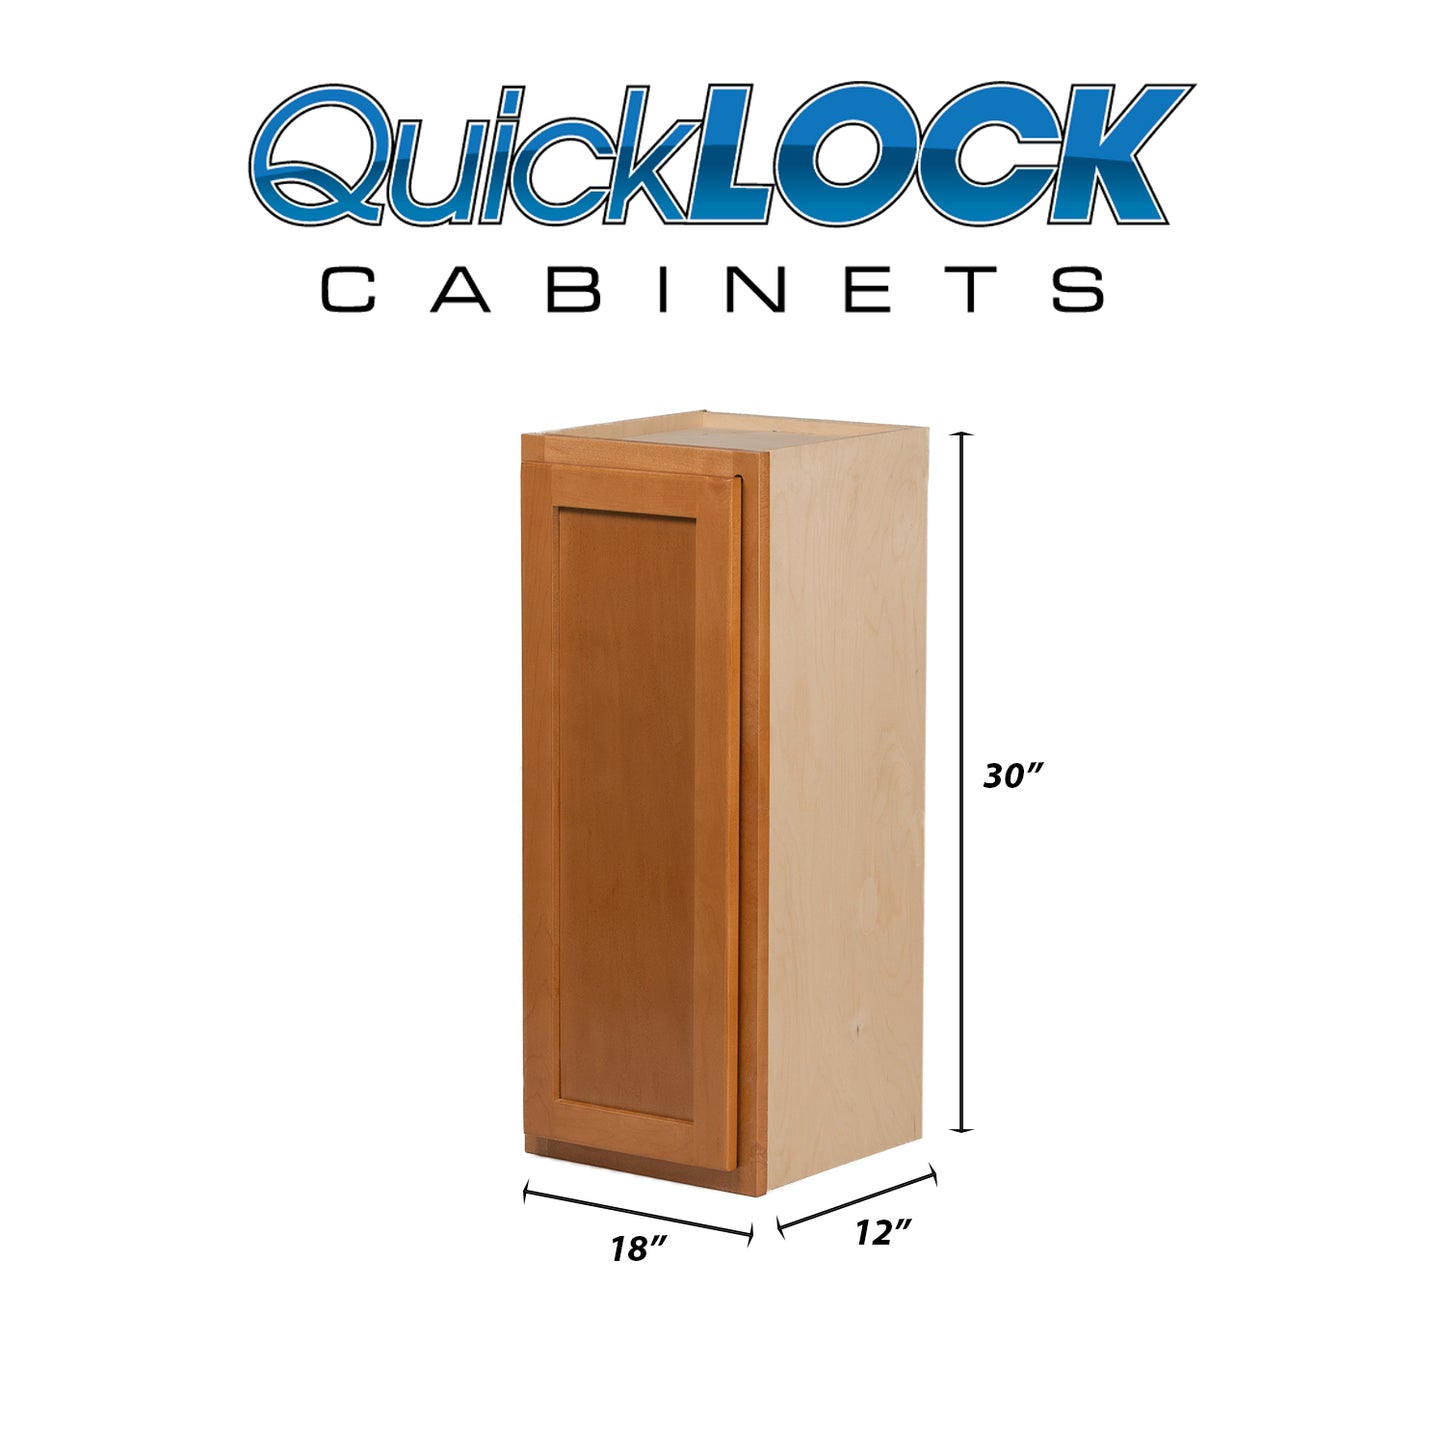 Quicklock RTA (Ready-to-Assemble) Provincial Stain 18"Wx30"Hx12"D" Wall Cabinet